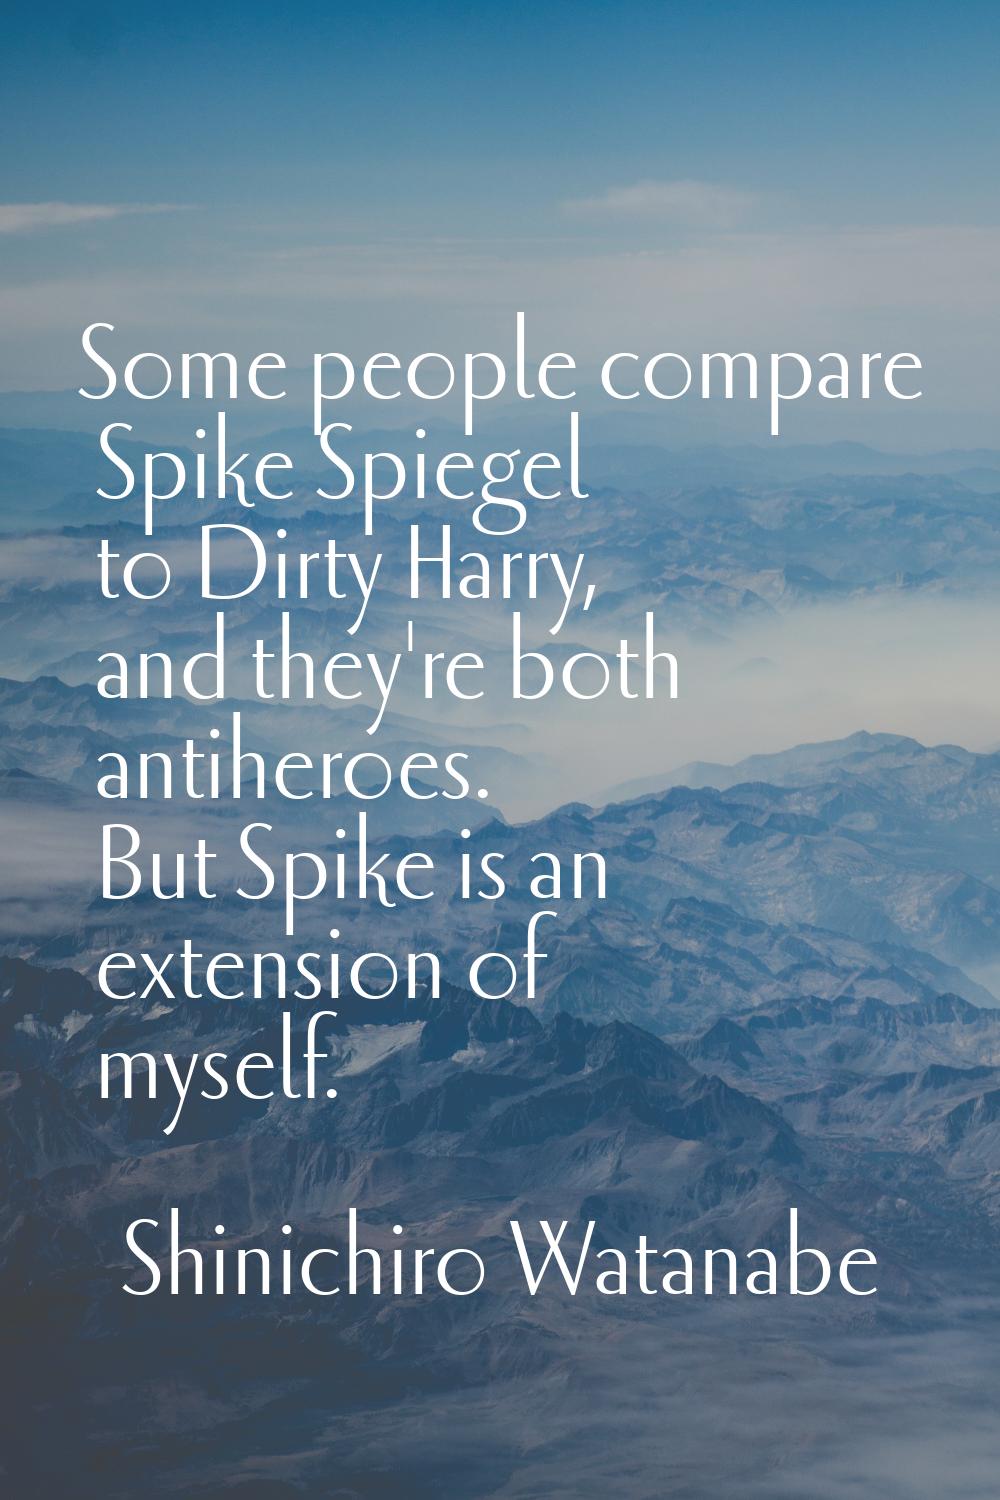 Some people compare Spike Spiegel to Dirty Harry, and they're both antiheroes. But Spike is an exte